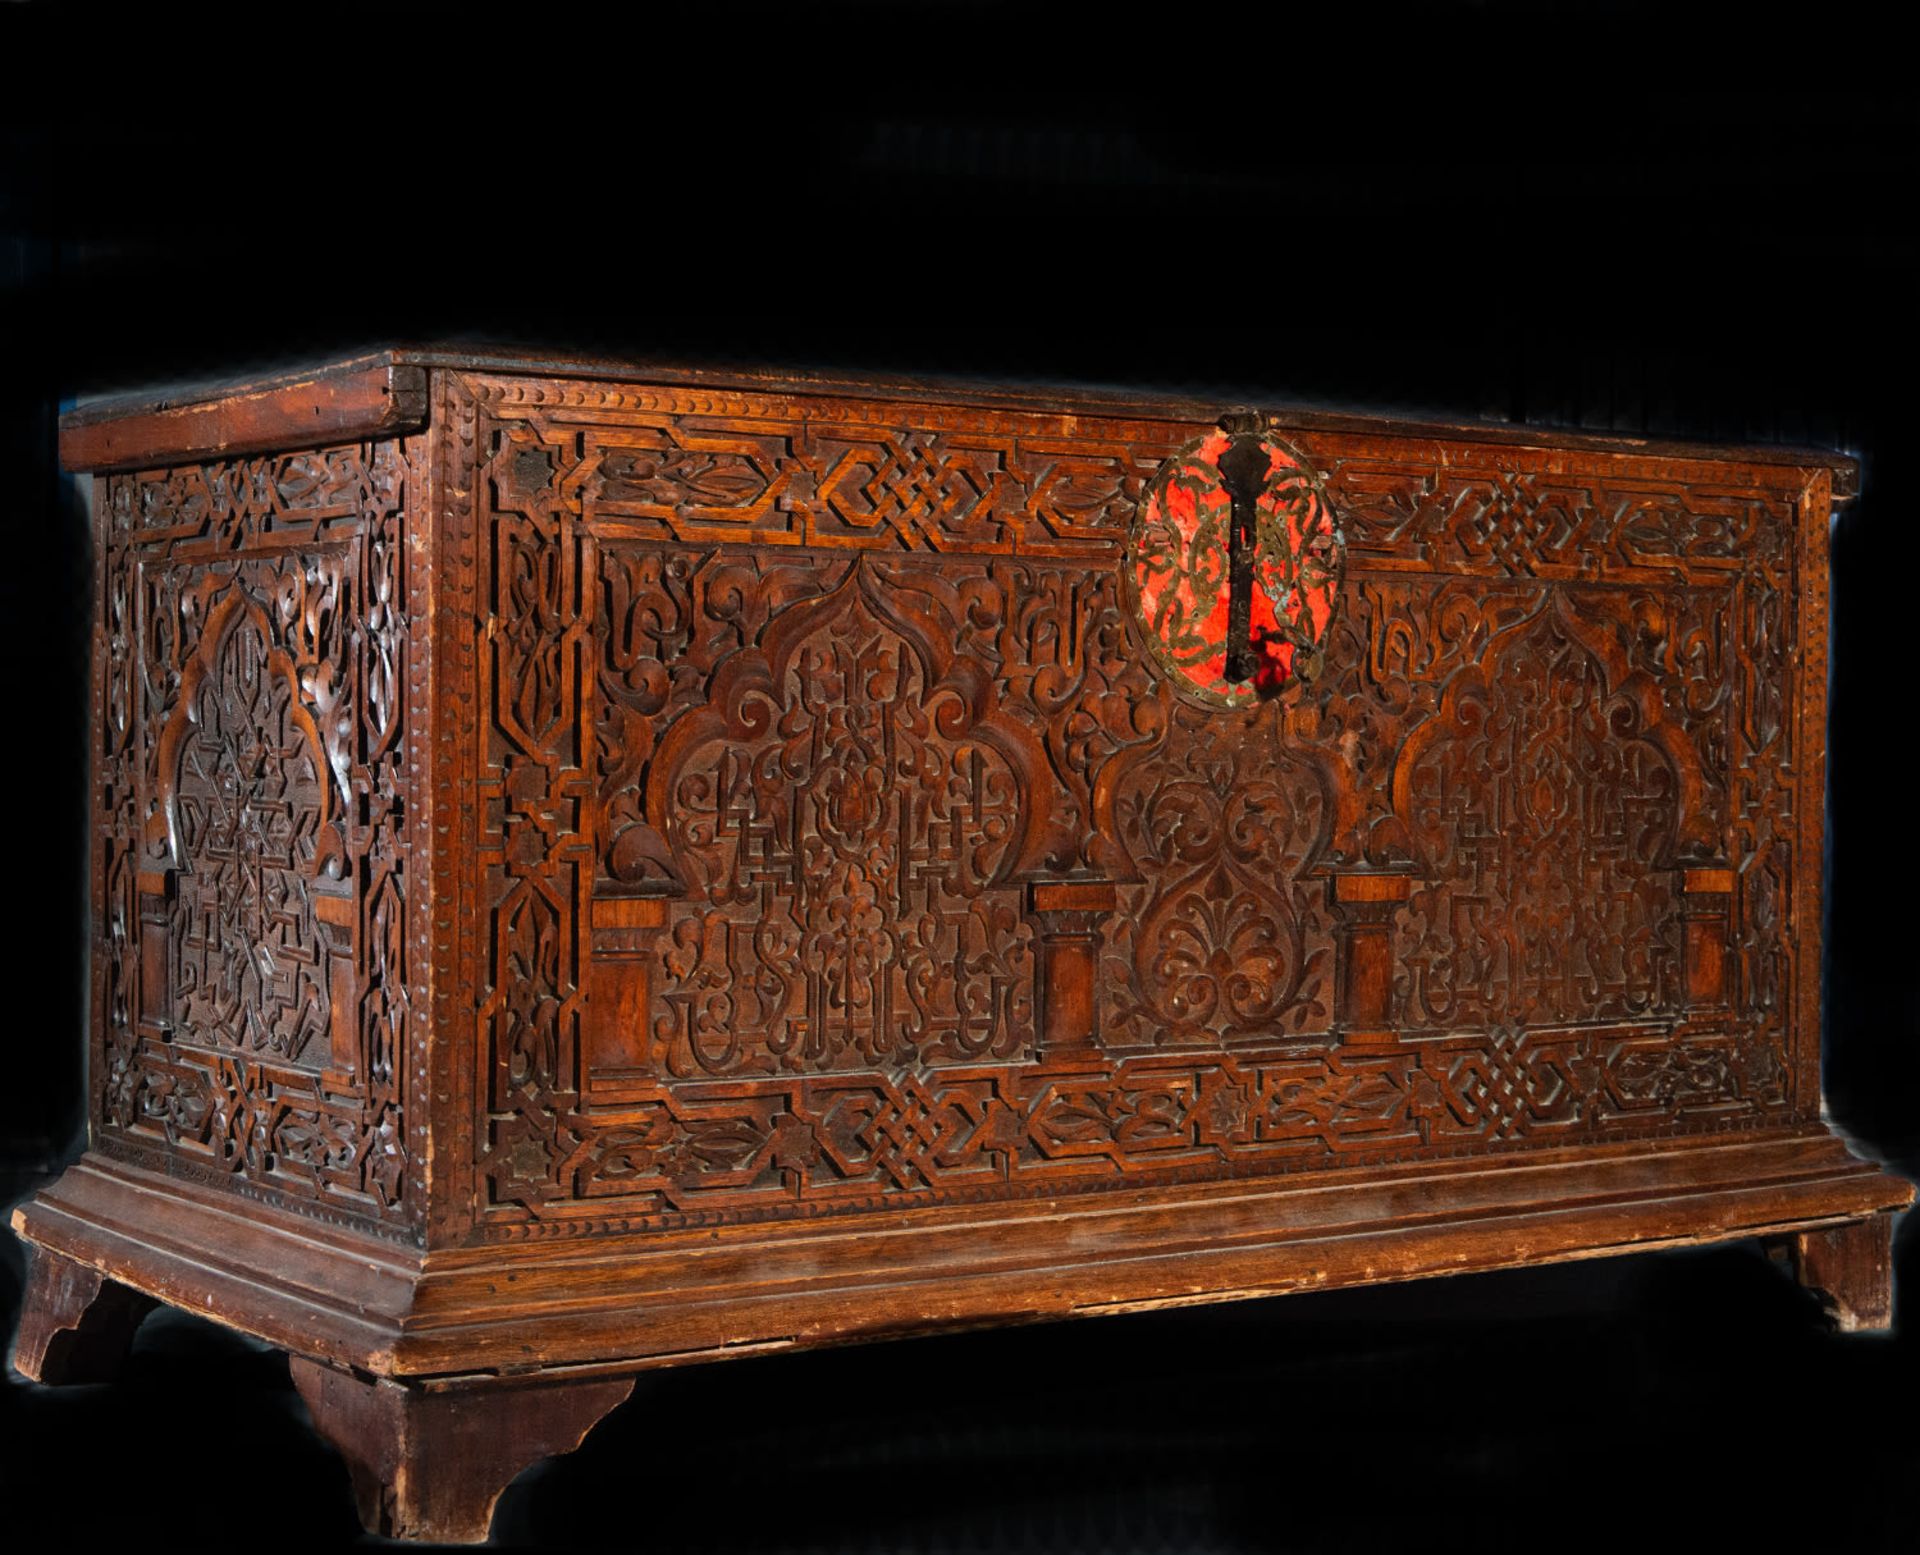 Nasrid style chest in cedar wood, Granada, 17th - 18th centuries - Image 5 of 12